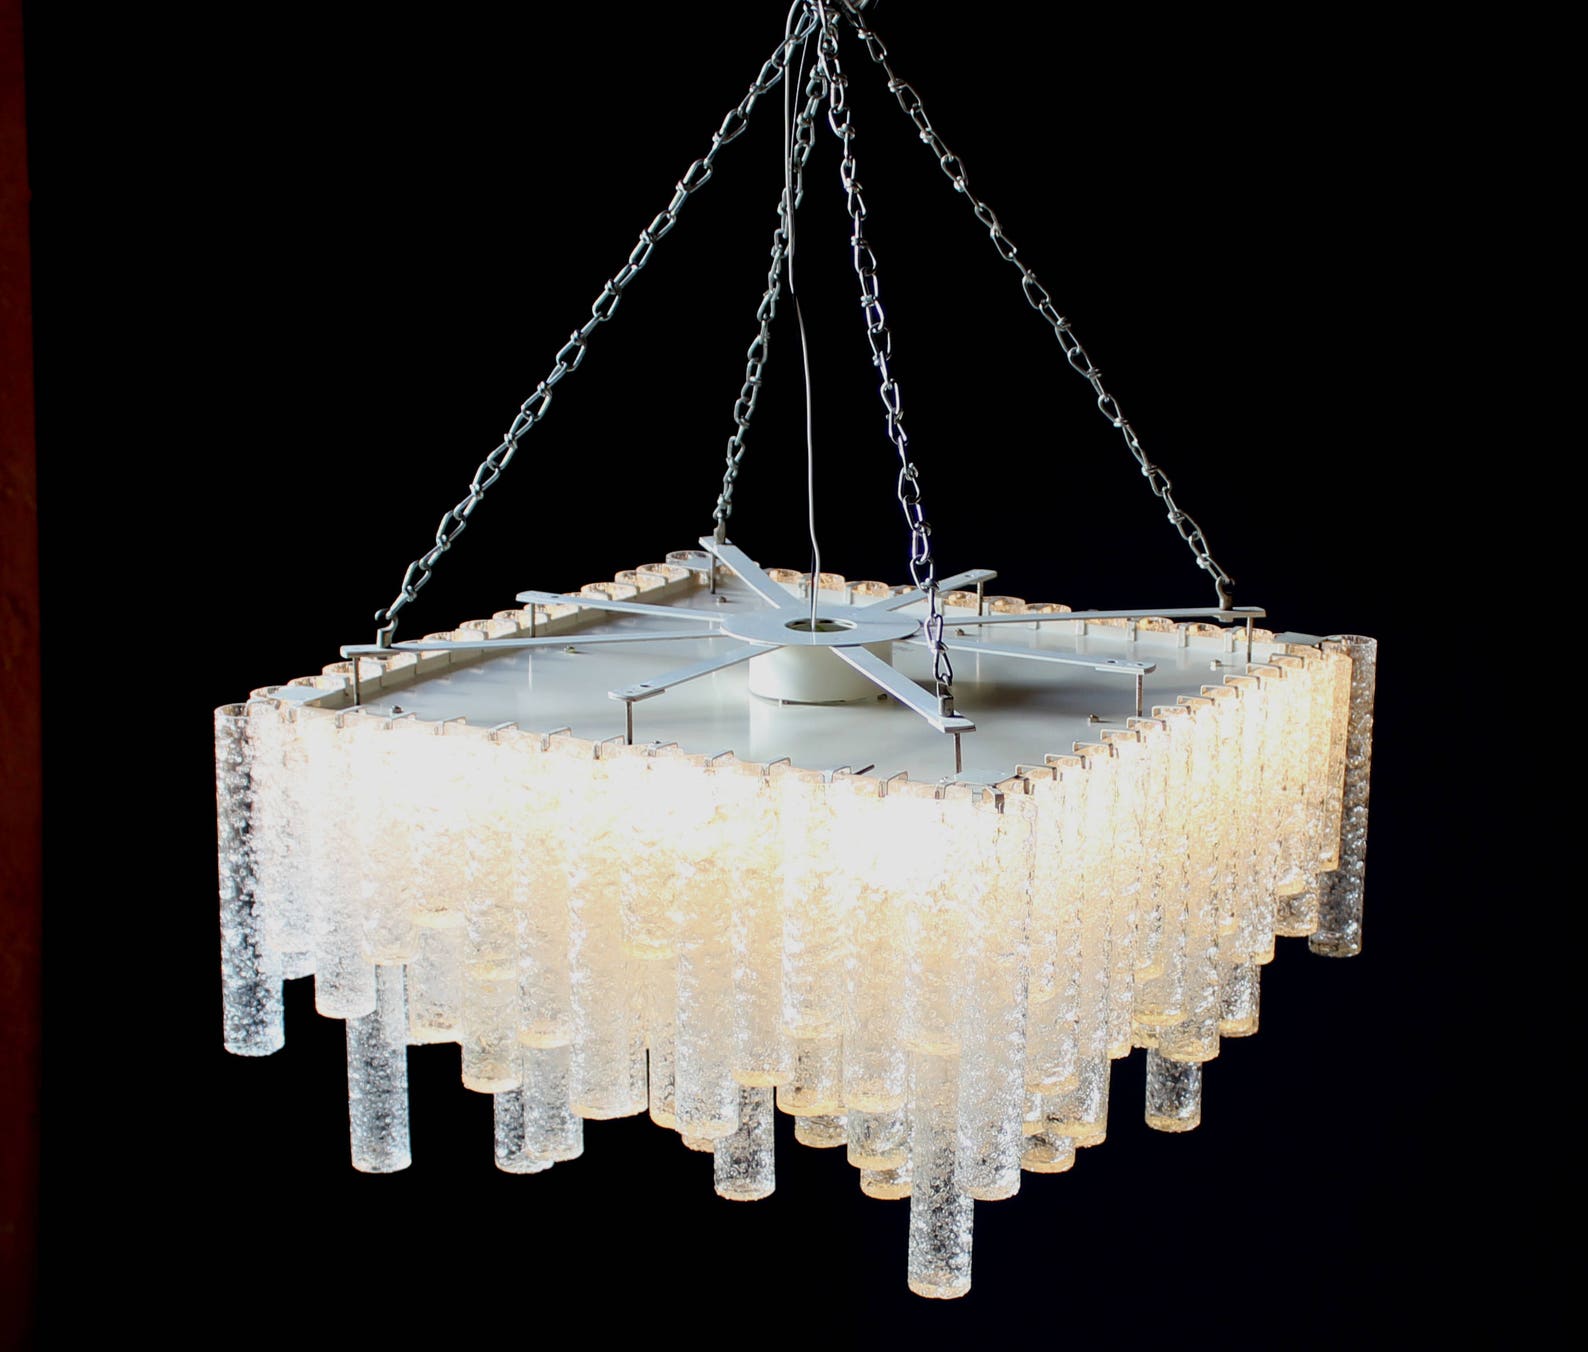 FANTASTIC DORIA FÜRTH GIGANTIC CRYSTAL GLASS PLAFONIERE

8 LIGHTS & 148 GRAND CLOSED HAND-MADE GLASS TUBES

DIAMETER 34 INCHES HEIGHT OF THE BODY 15 INCHES 

SPECTACULAR RARE & ELEGANT 8 LIGHTS (E27) FINE CRYSTAL BALLROOM CHANDELIER 1970´s / DORIA /